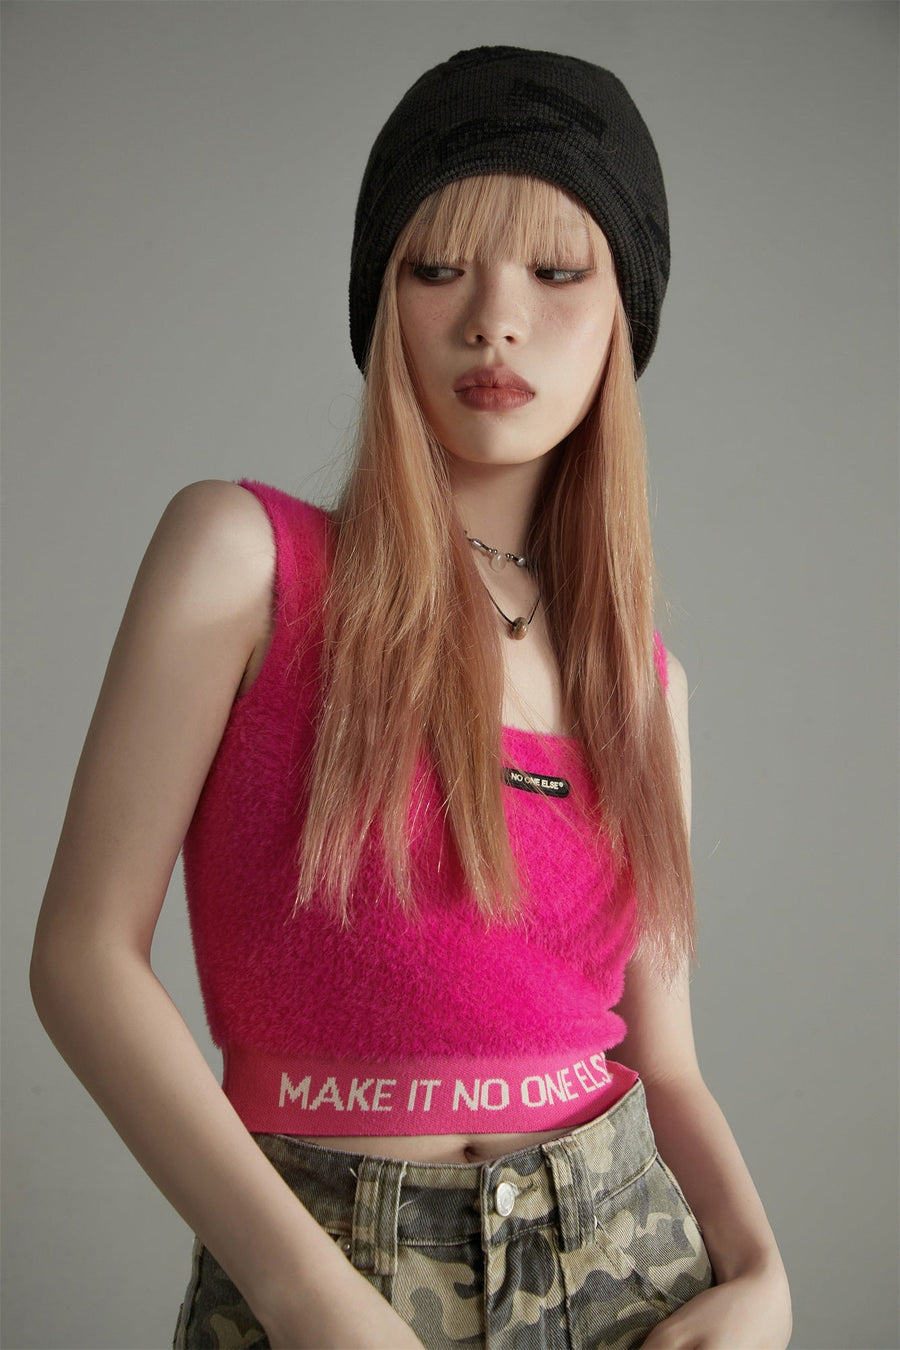 Lettering Soft Fluffly Sleeveless Crop Top